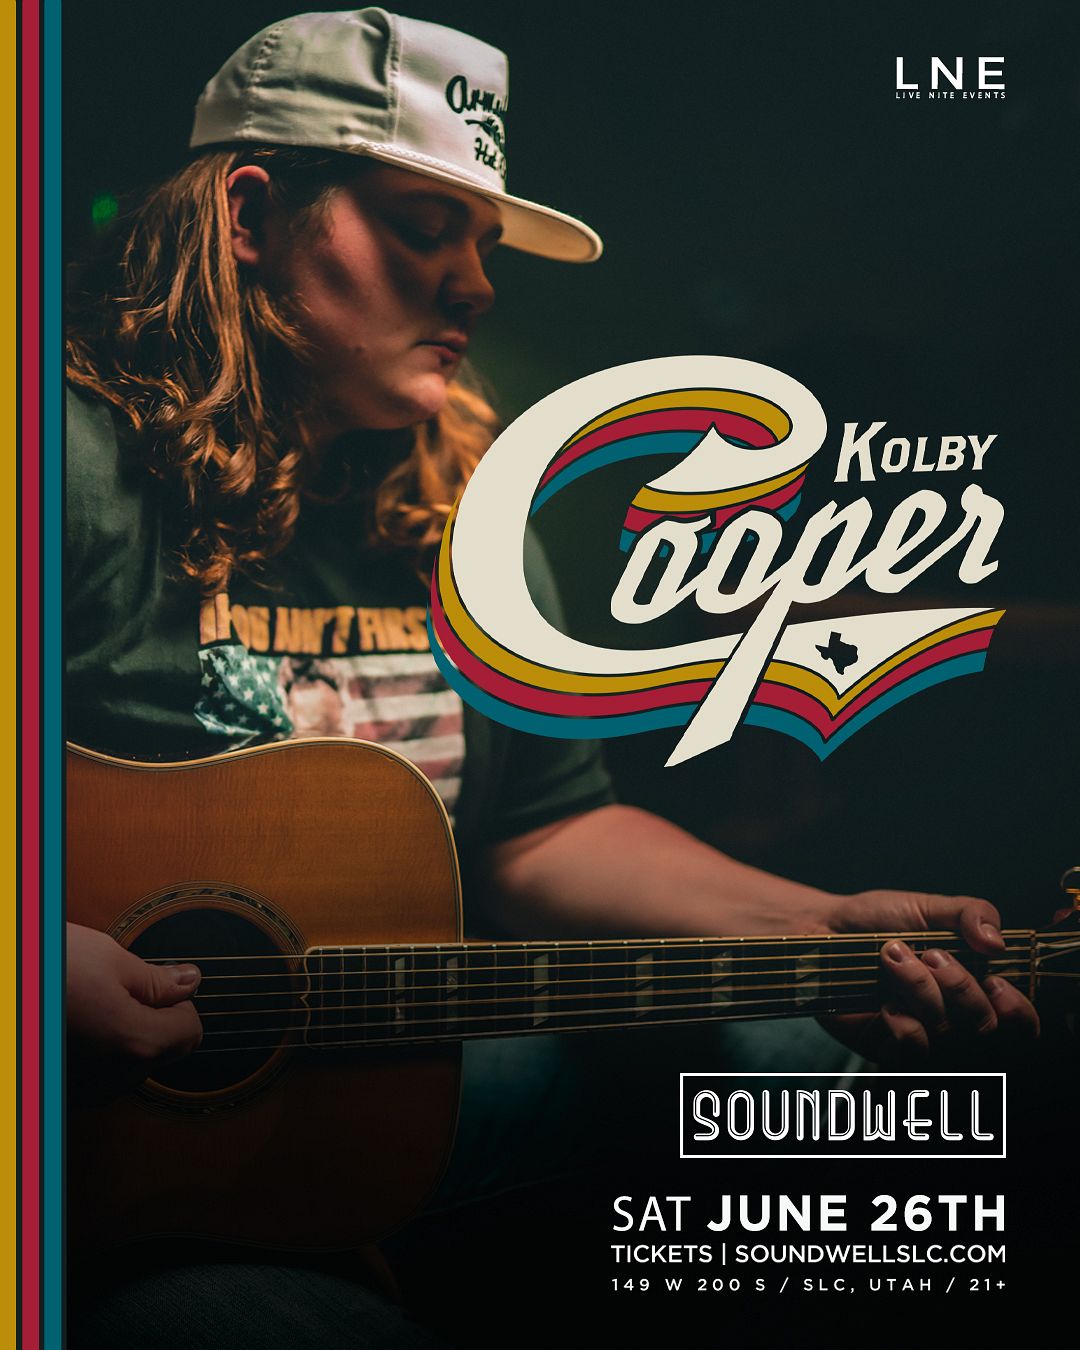 Kolby Cooper at Soundwell Tickets at Soundwell in Salt Lake City by